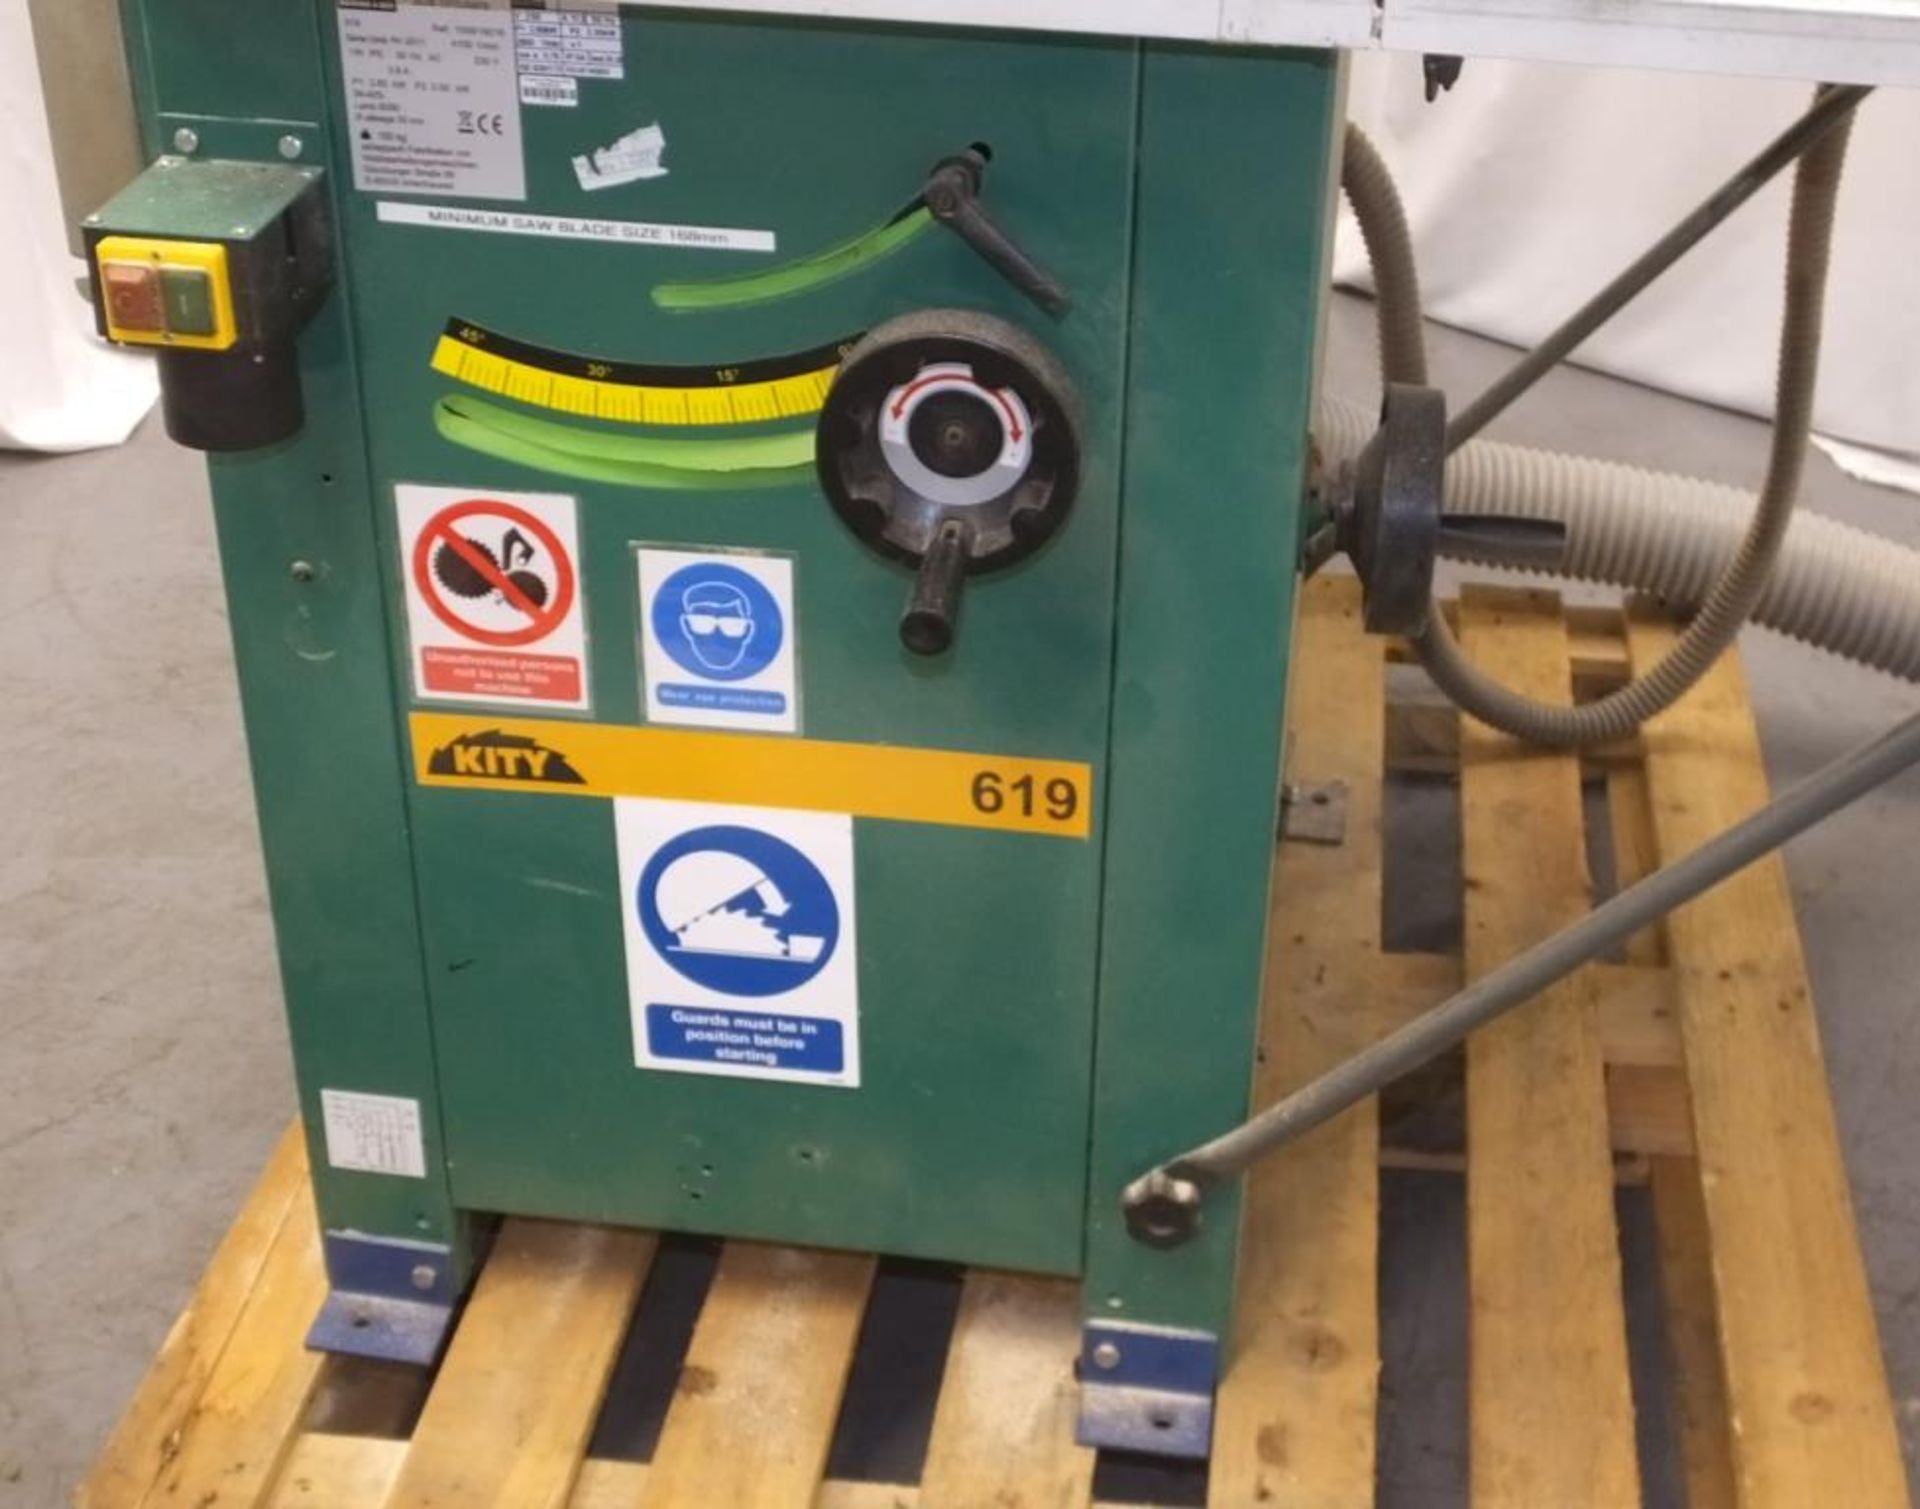 Kity circular saw table - 619 - 4100RPM - 1ph - 50hz - 230V - 2.6kW - Image 7 of 13